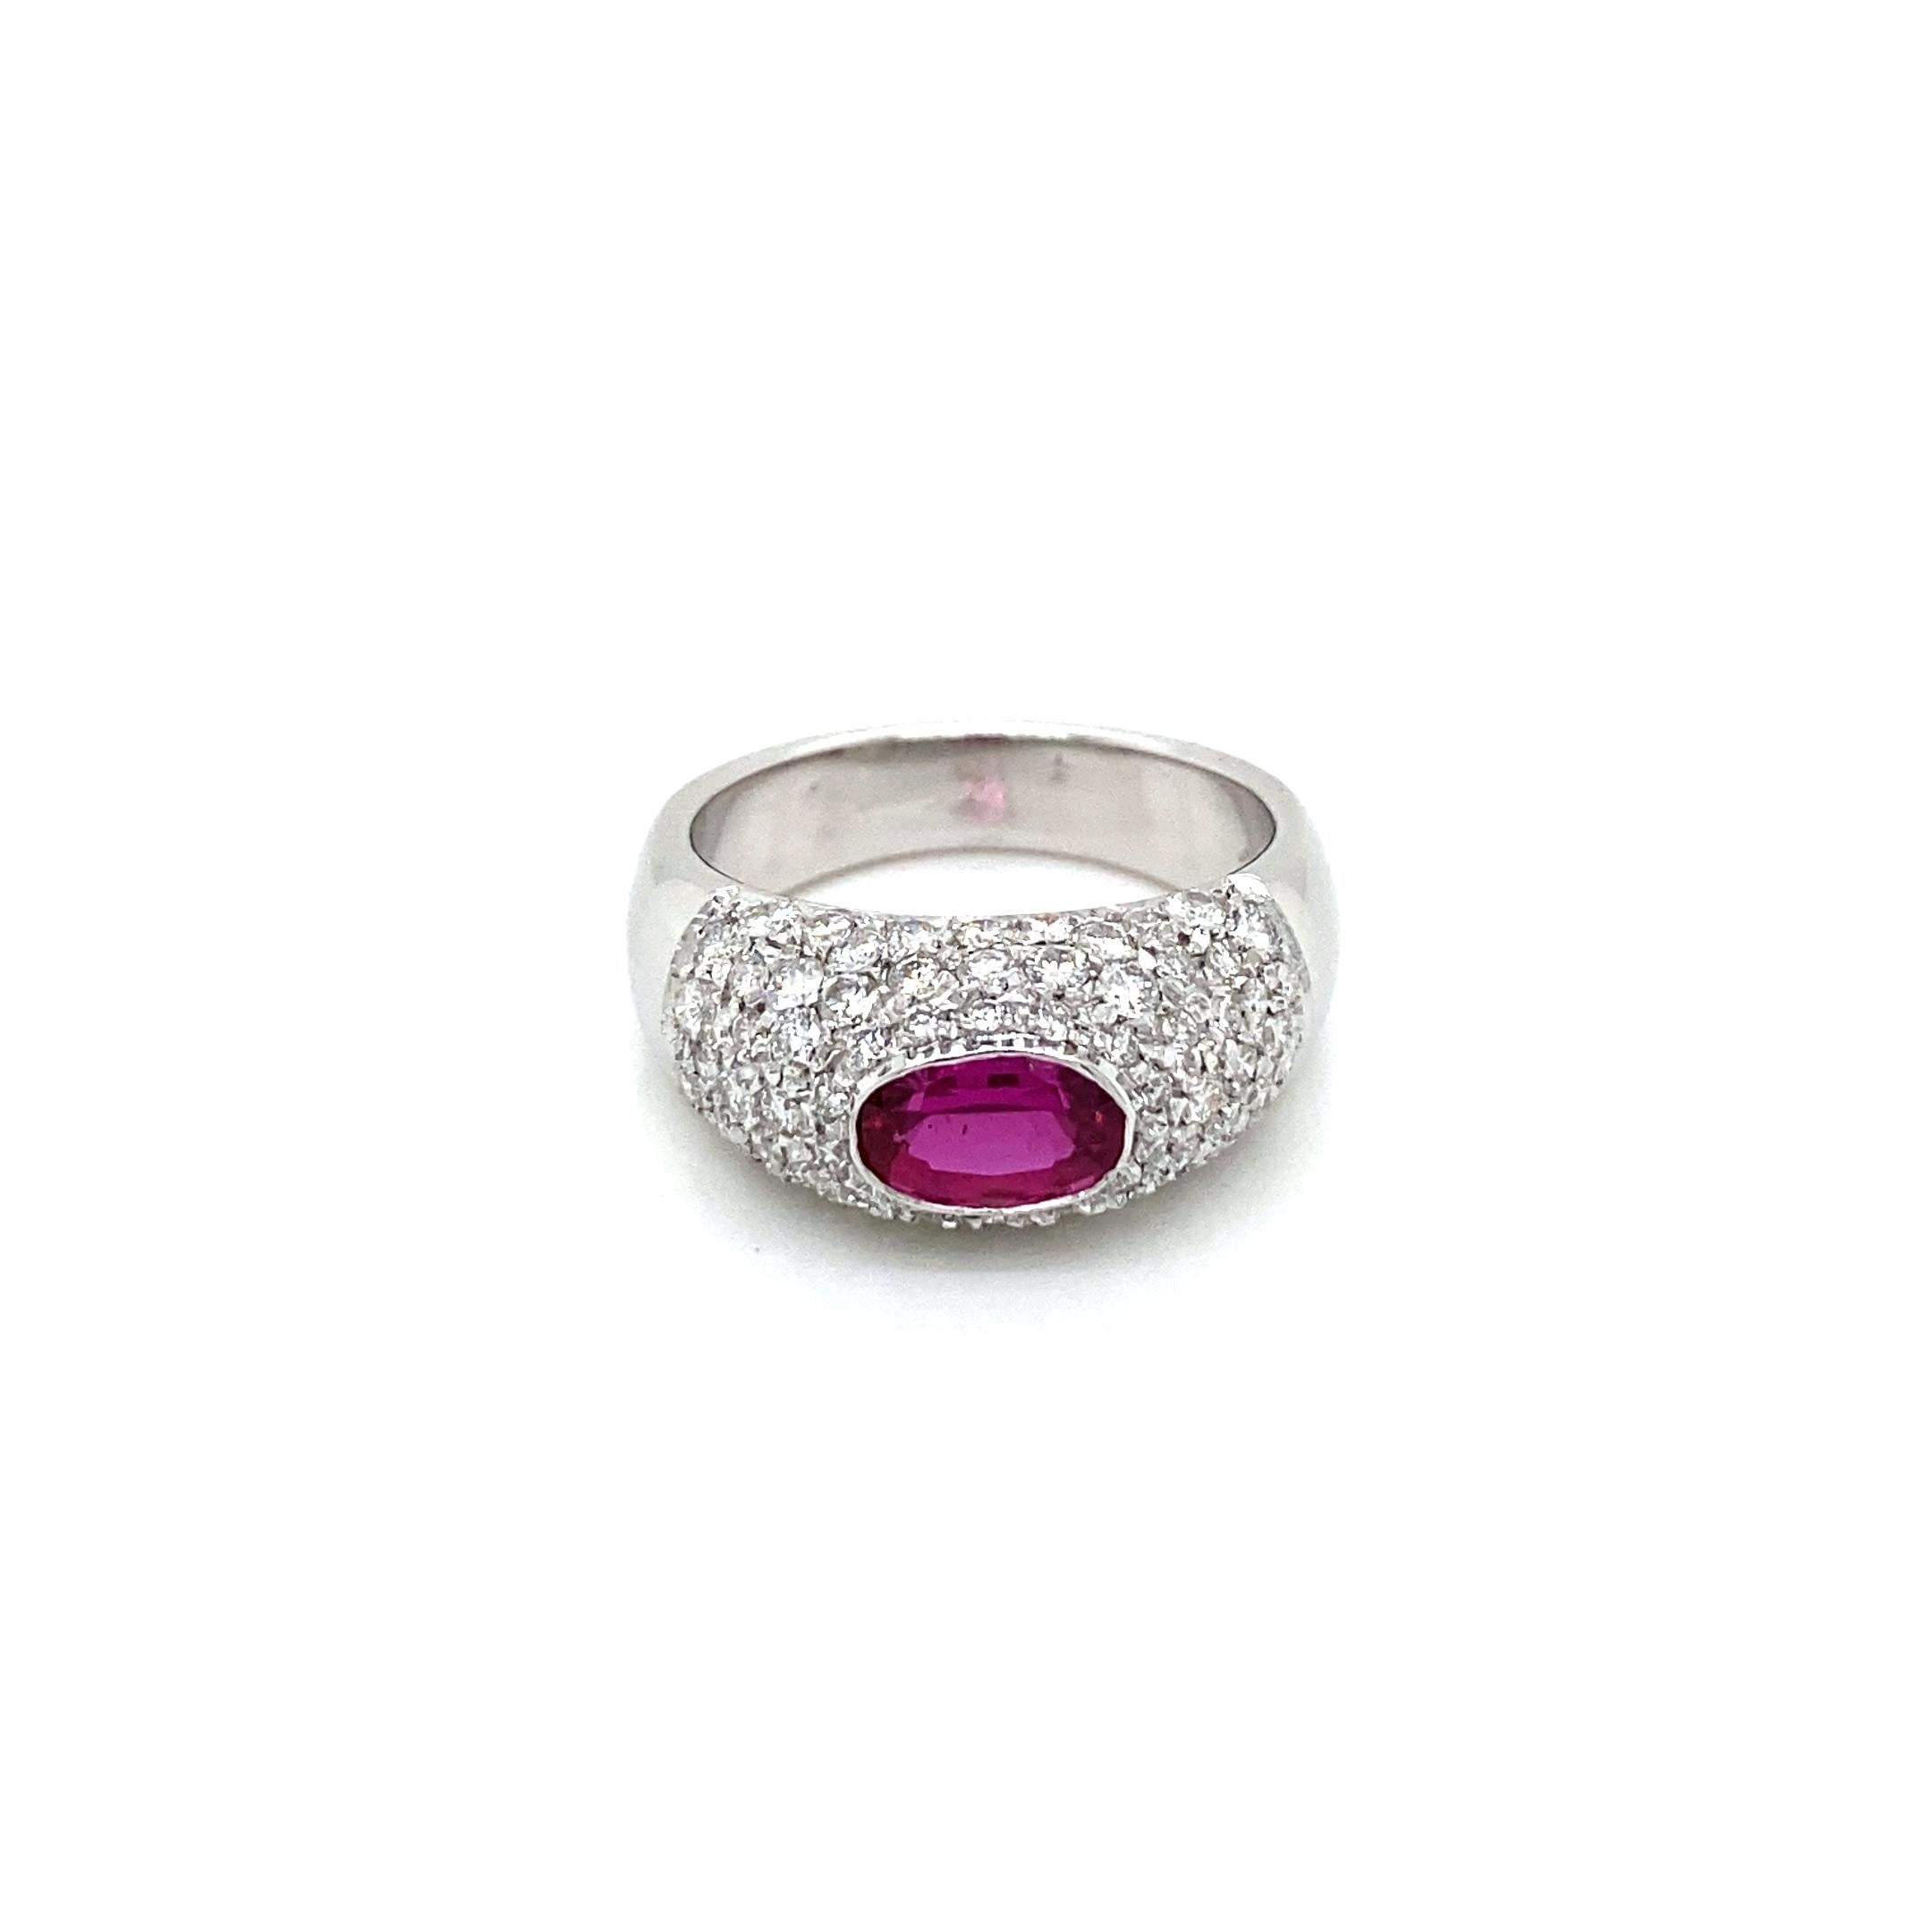 A timeless design Diamond band ring set in 18k white gold, it features a vivid natural oval Ruby in the center, weight 1.10 carat, surrounded by 1.50 carats of Sparkling Round brilliant cut diamond, graded G Color VS clarity, pavé setting. When